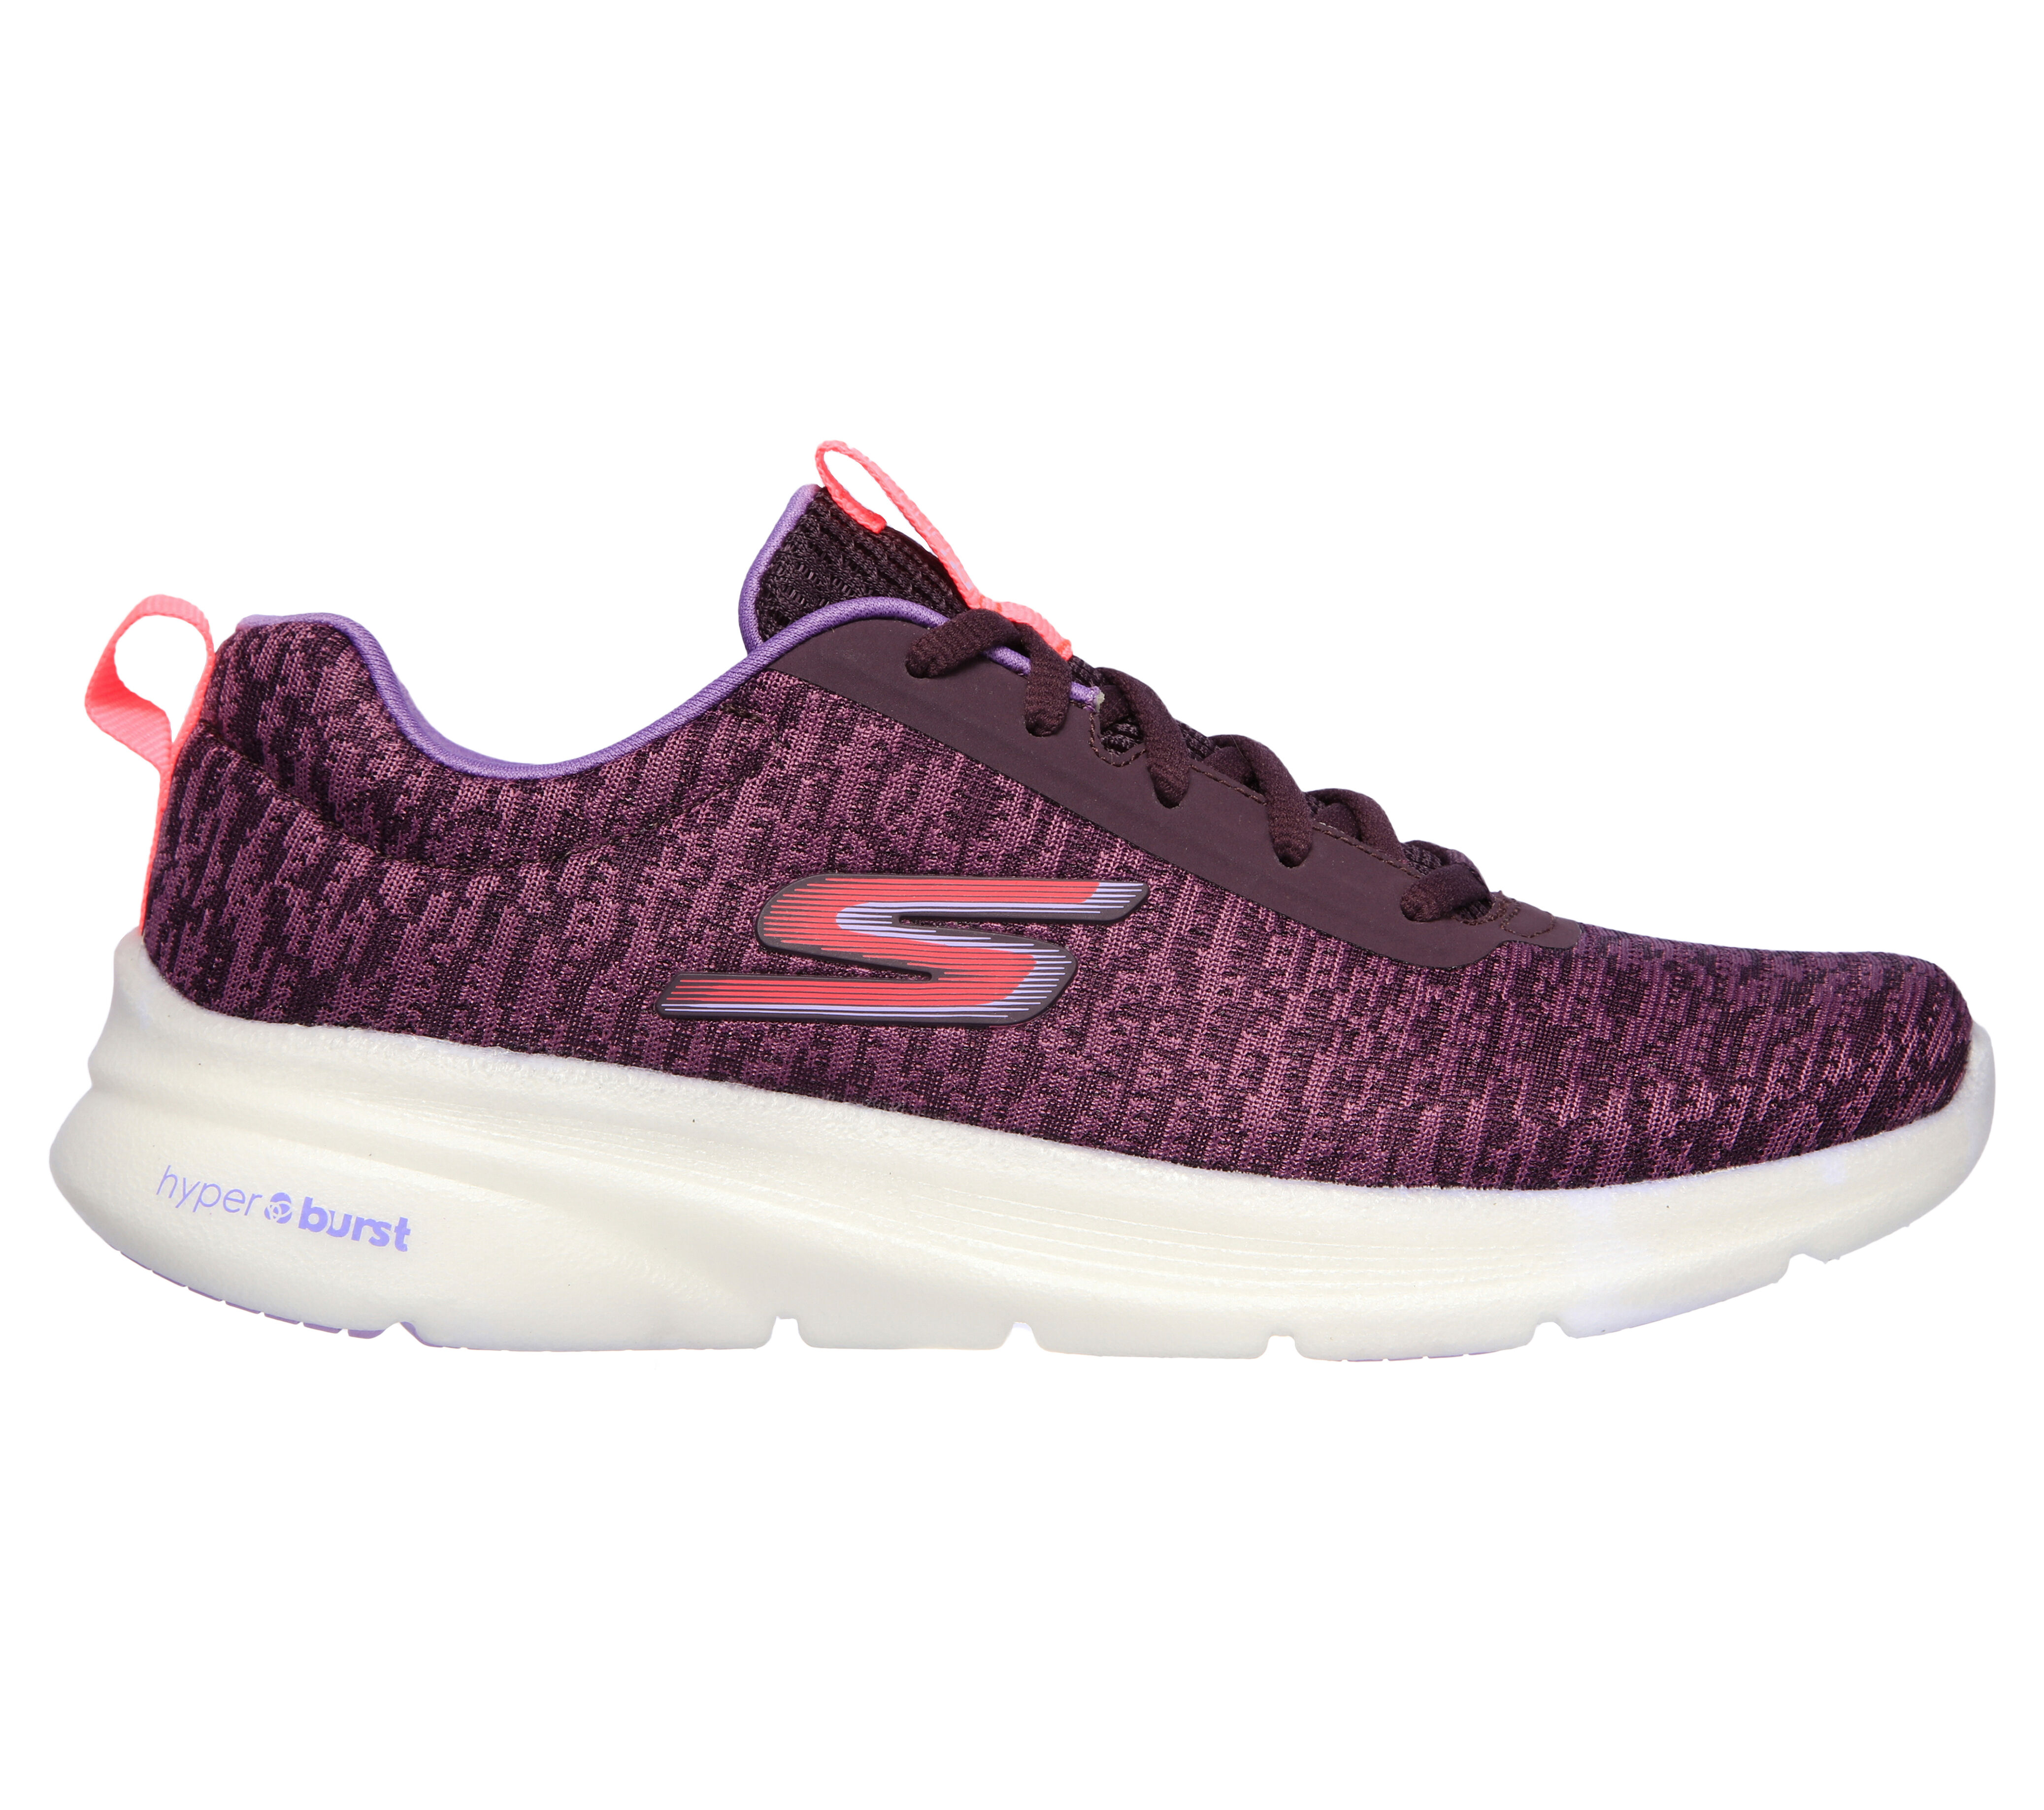 skechers shoes clearance india